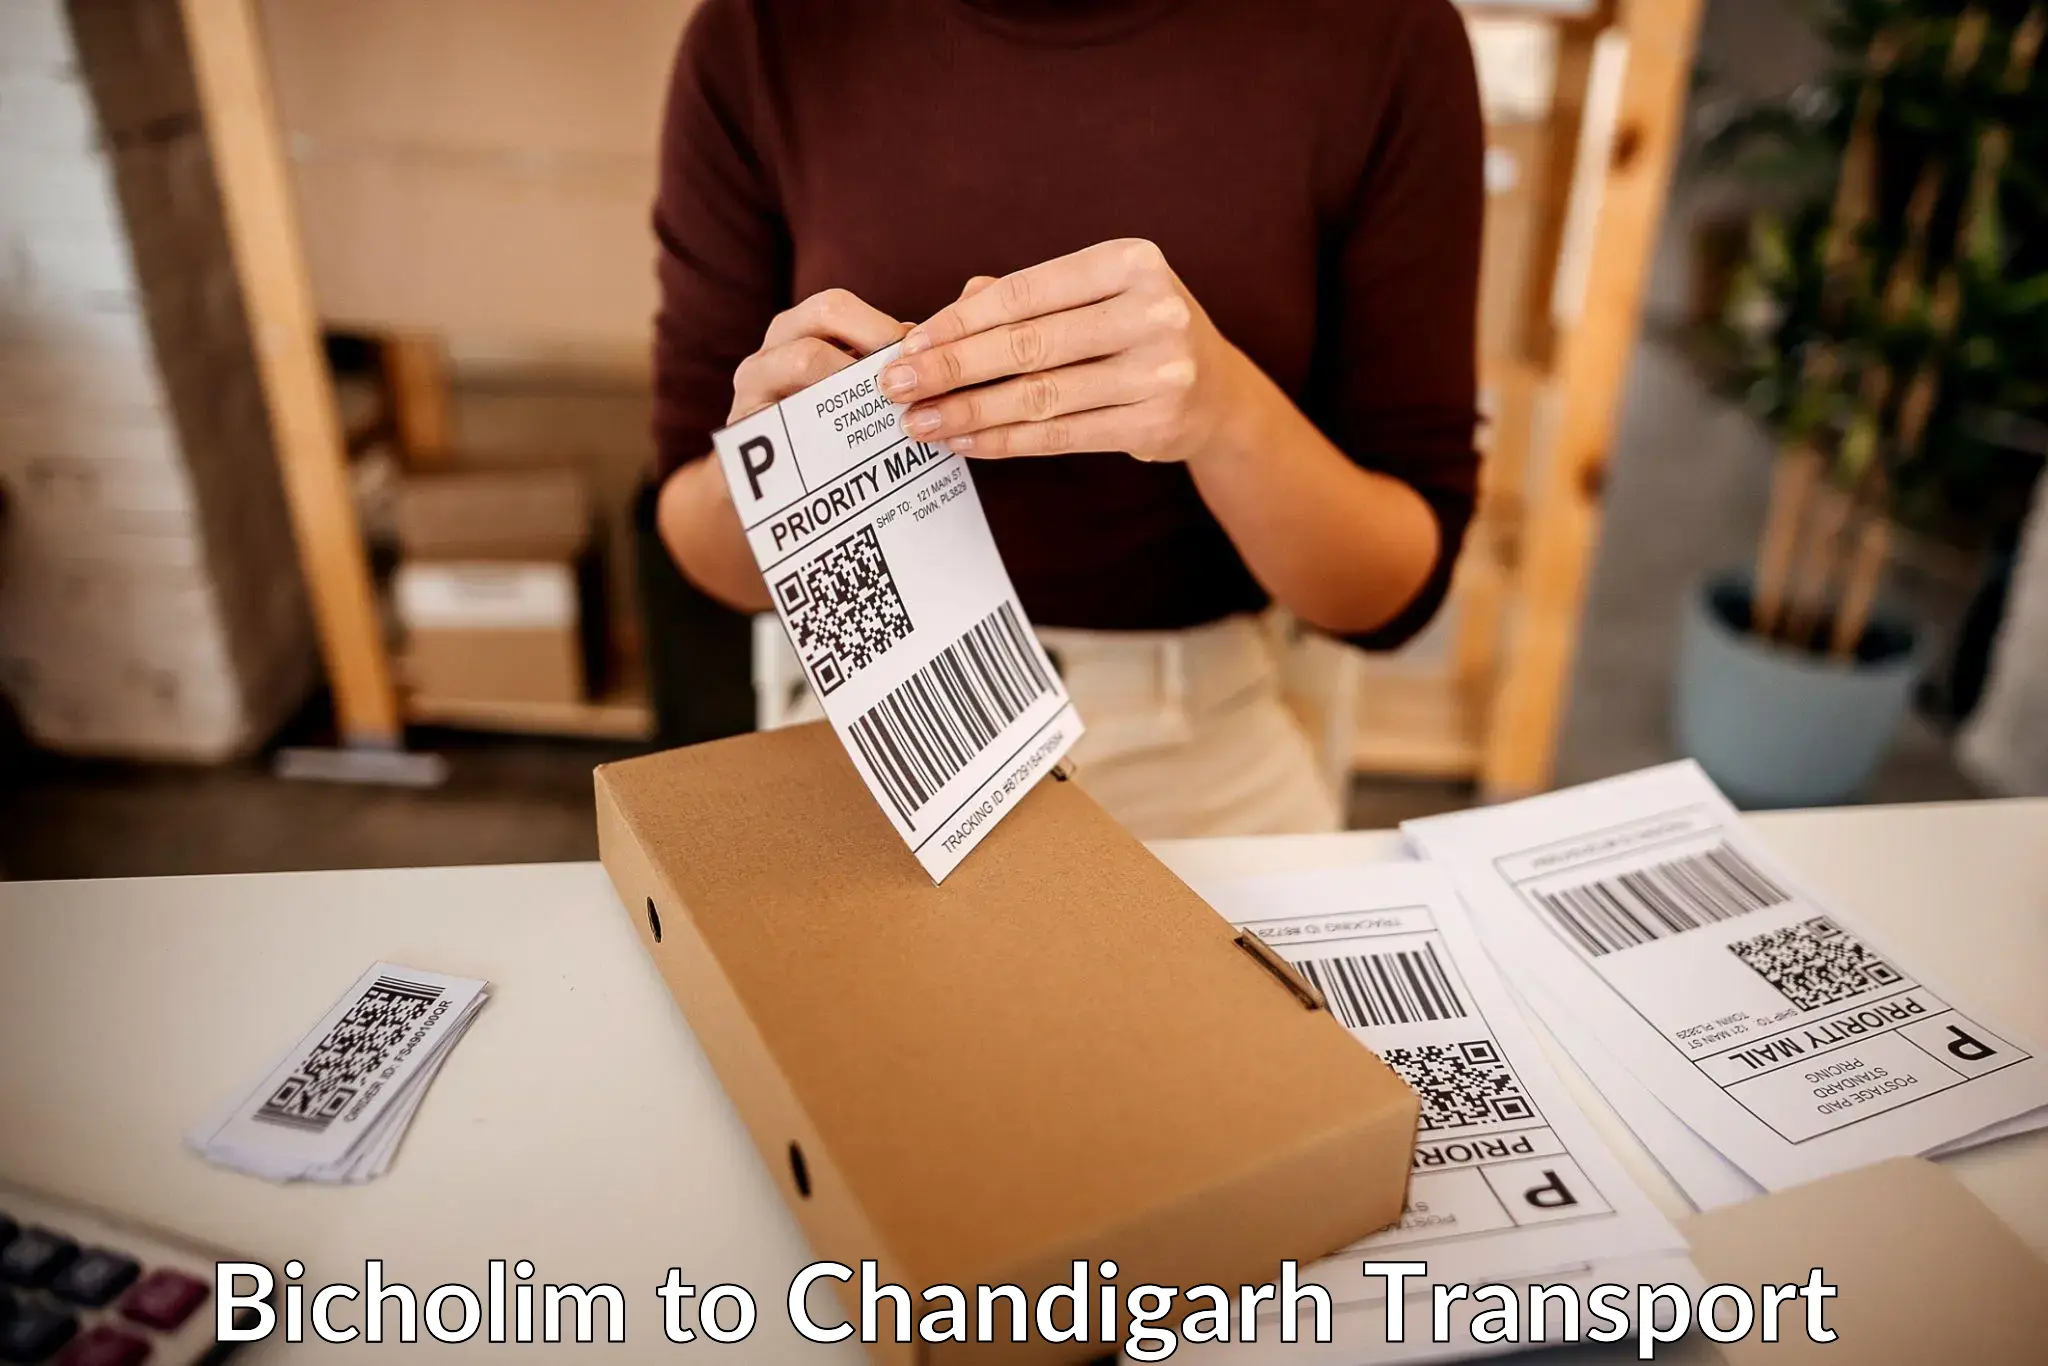 Part load transport service in India Bicholim to Chandigarh